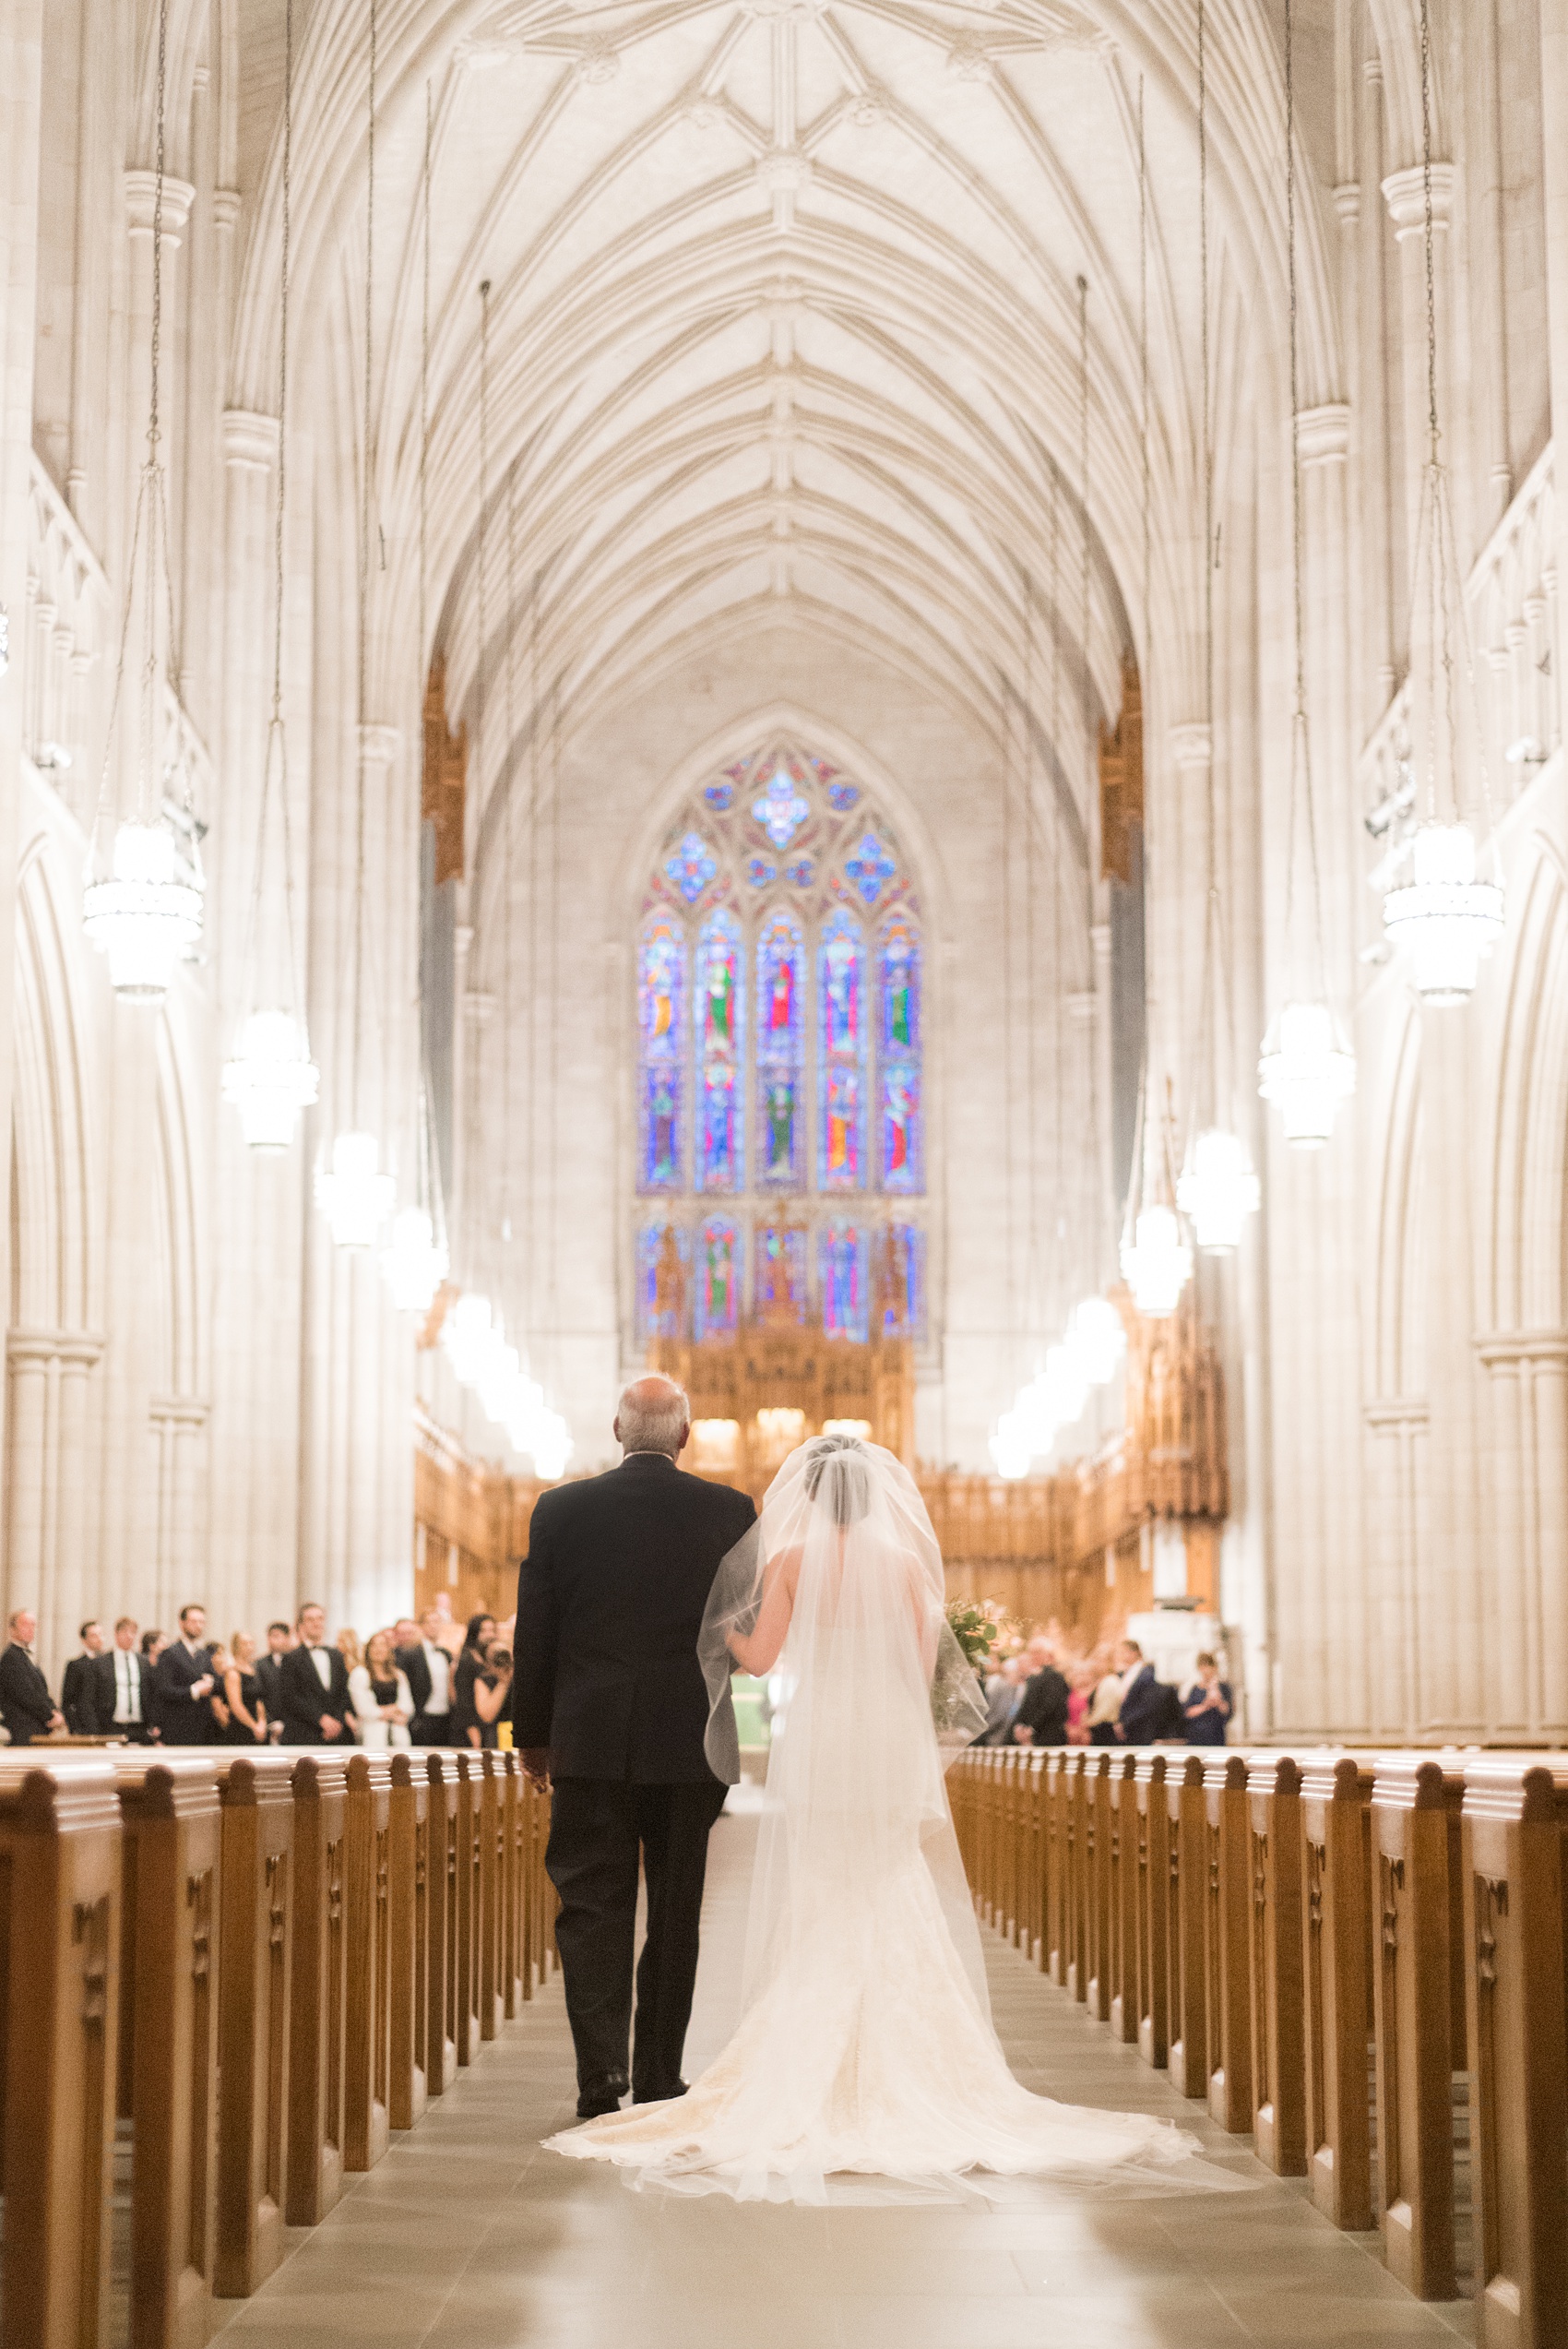 Mikkel Paige Photography photo of a wedding in Chapel Hill at Duke Chapel. Bride and groom with the gothic architecture. Picture of the bride and her father walking down the aisle inside the gothic church.